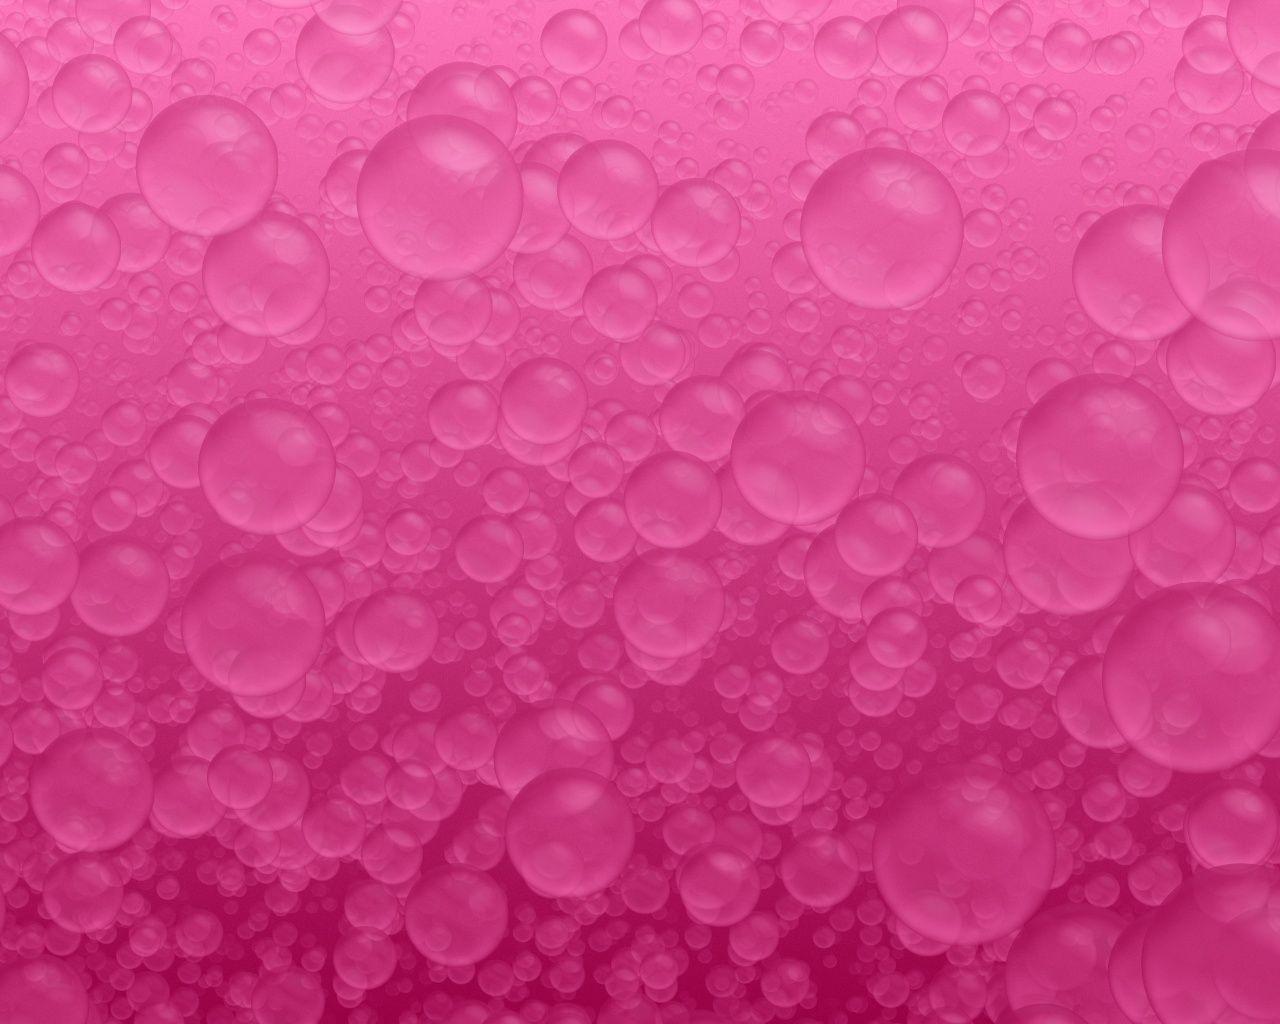 More Like wallpaper: CLARITY pink